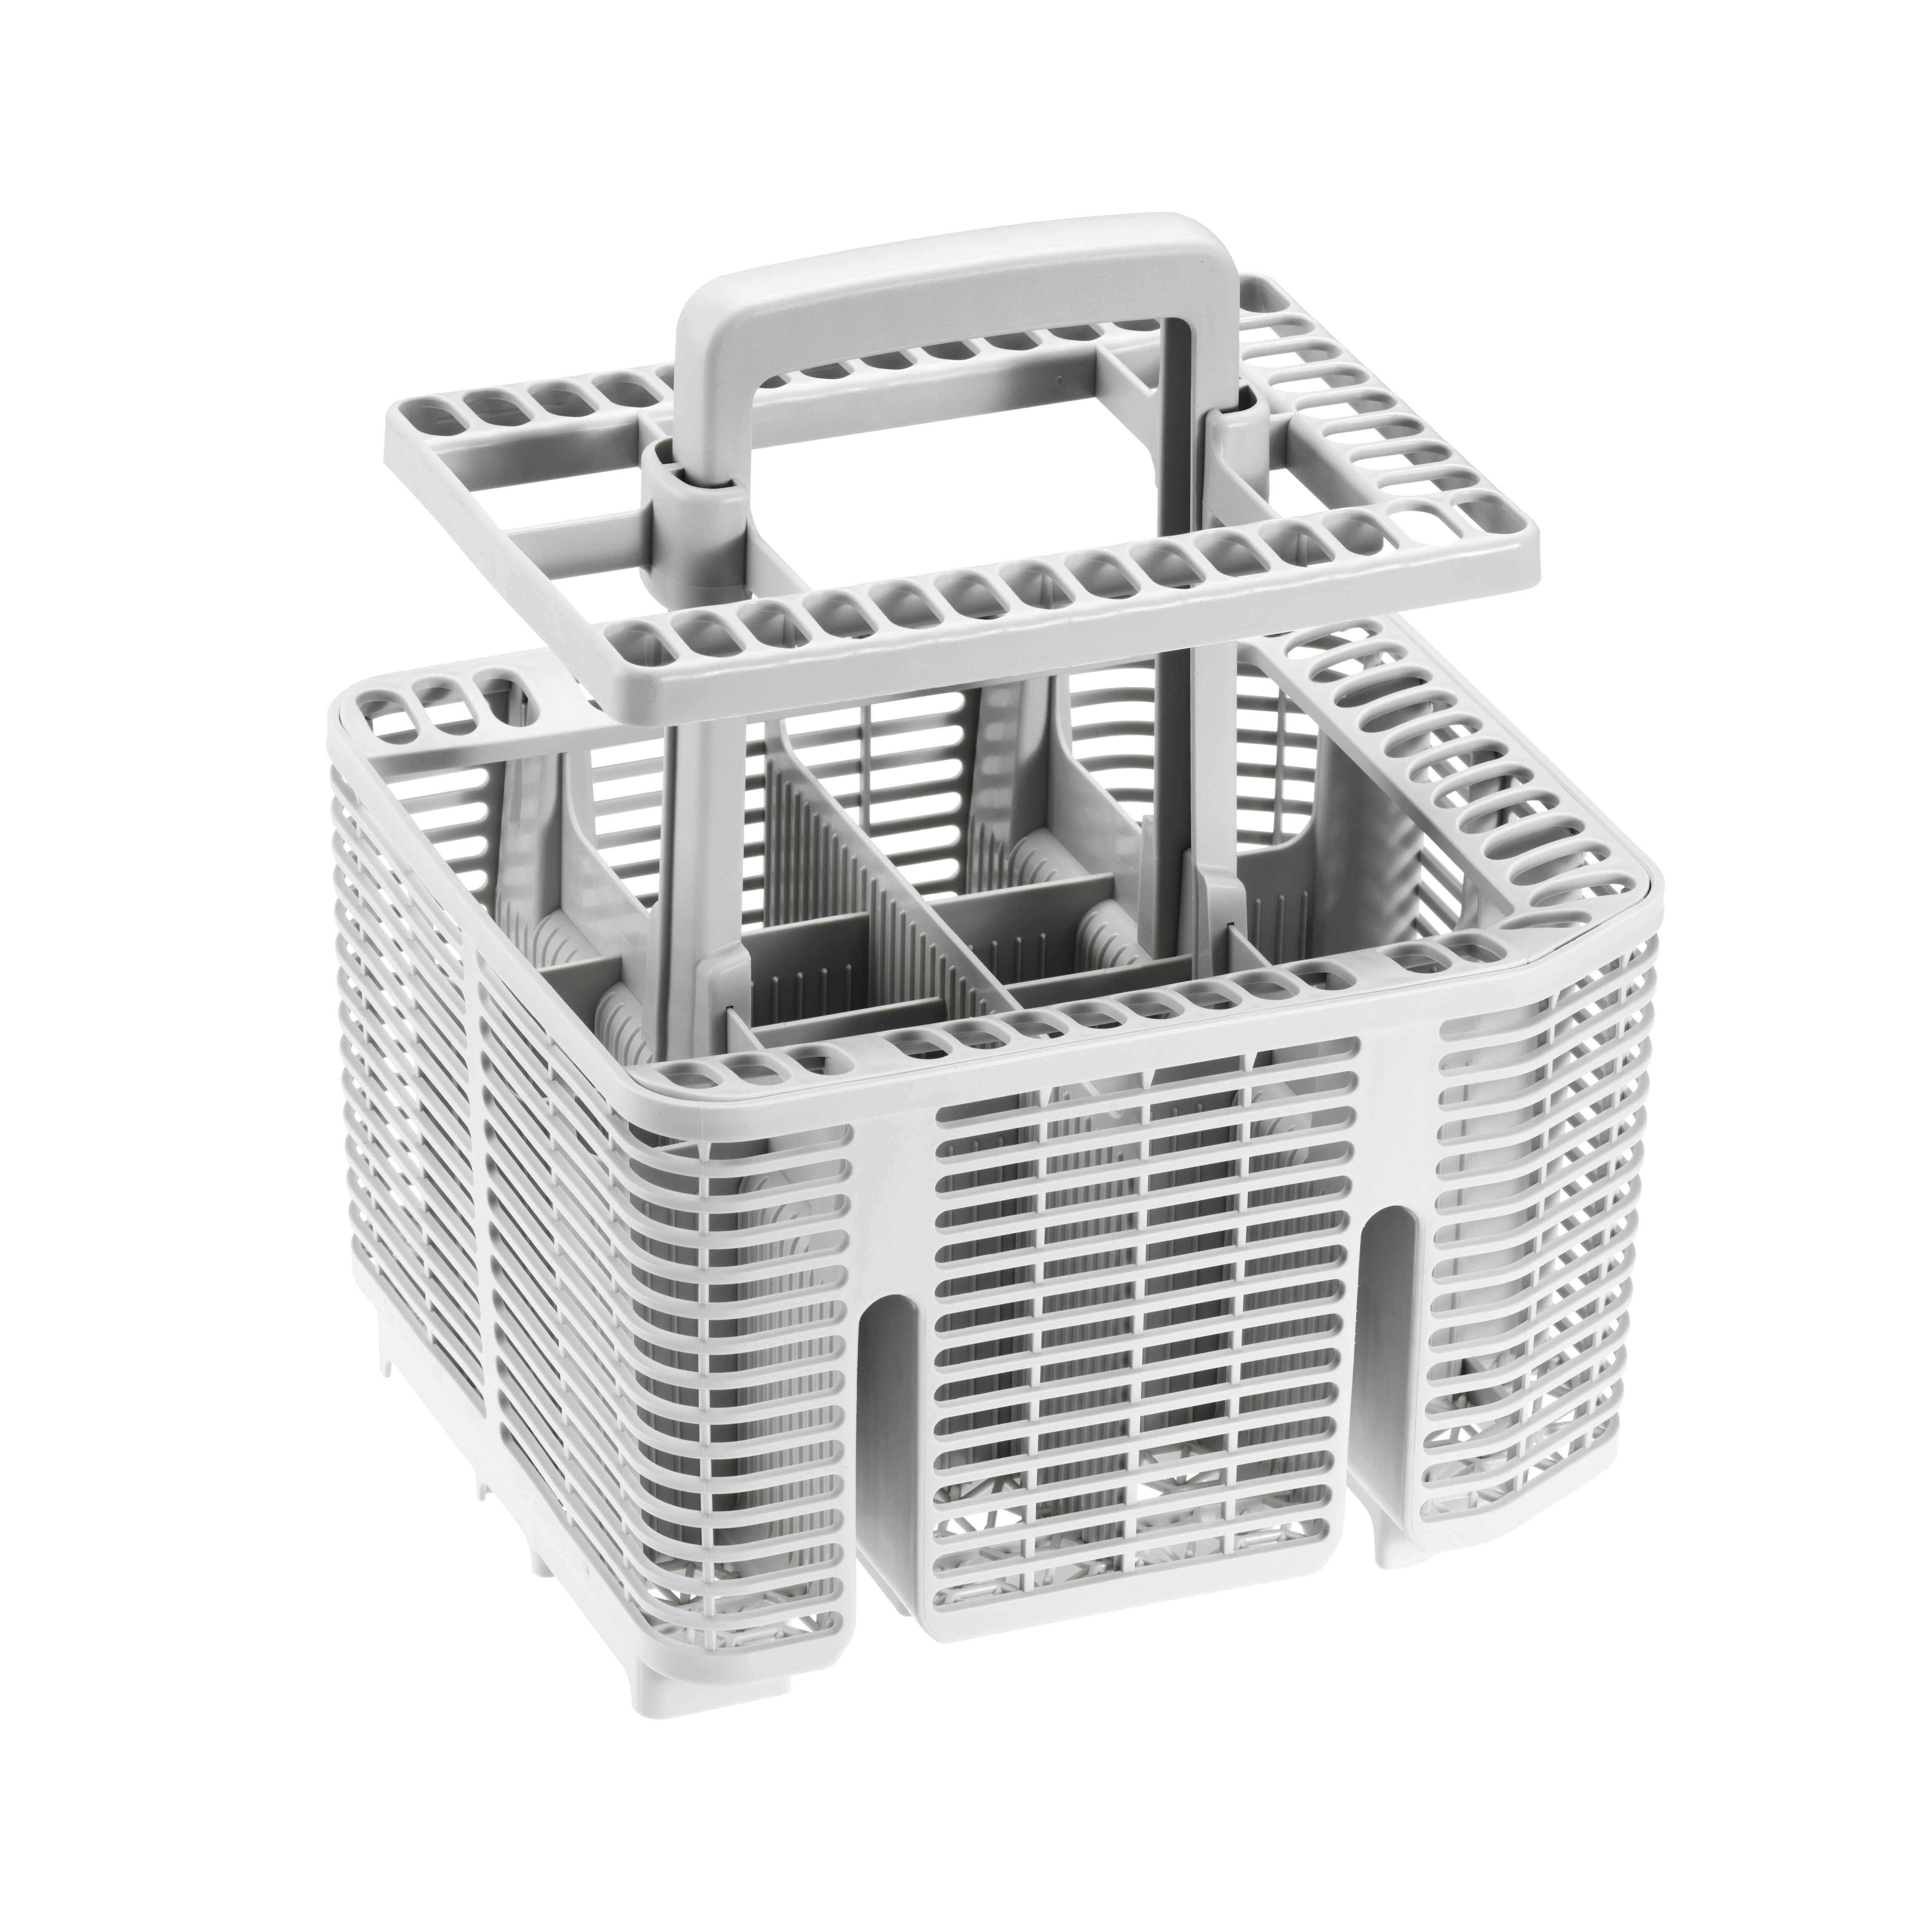 6 Compartment Twin Cutlery Basket Rack Fits Miele Dishwasher 